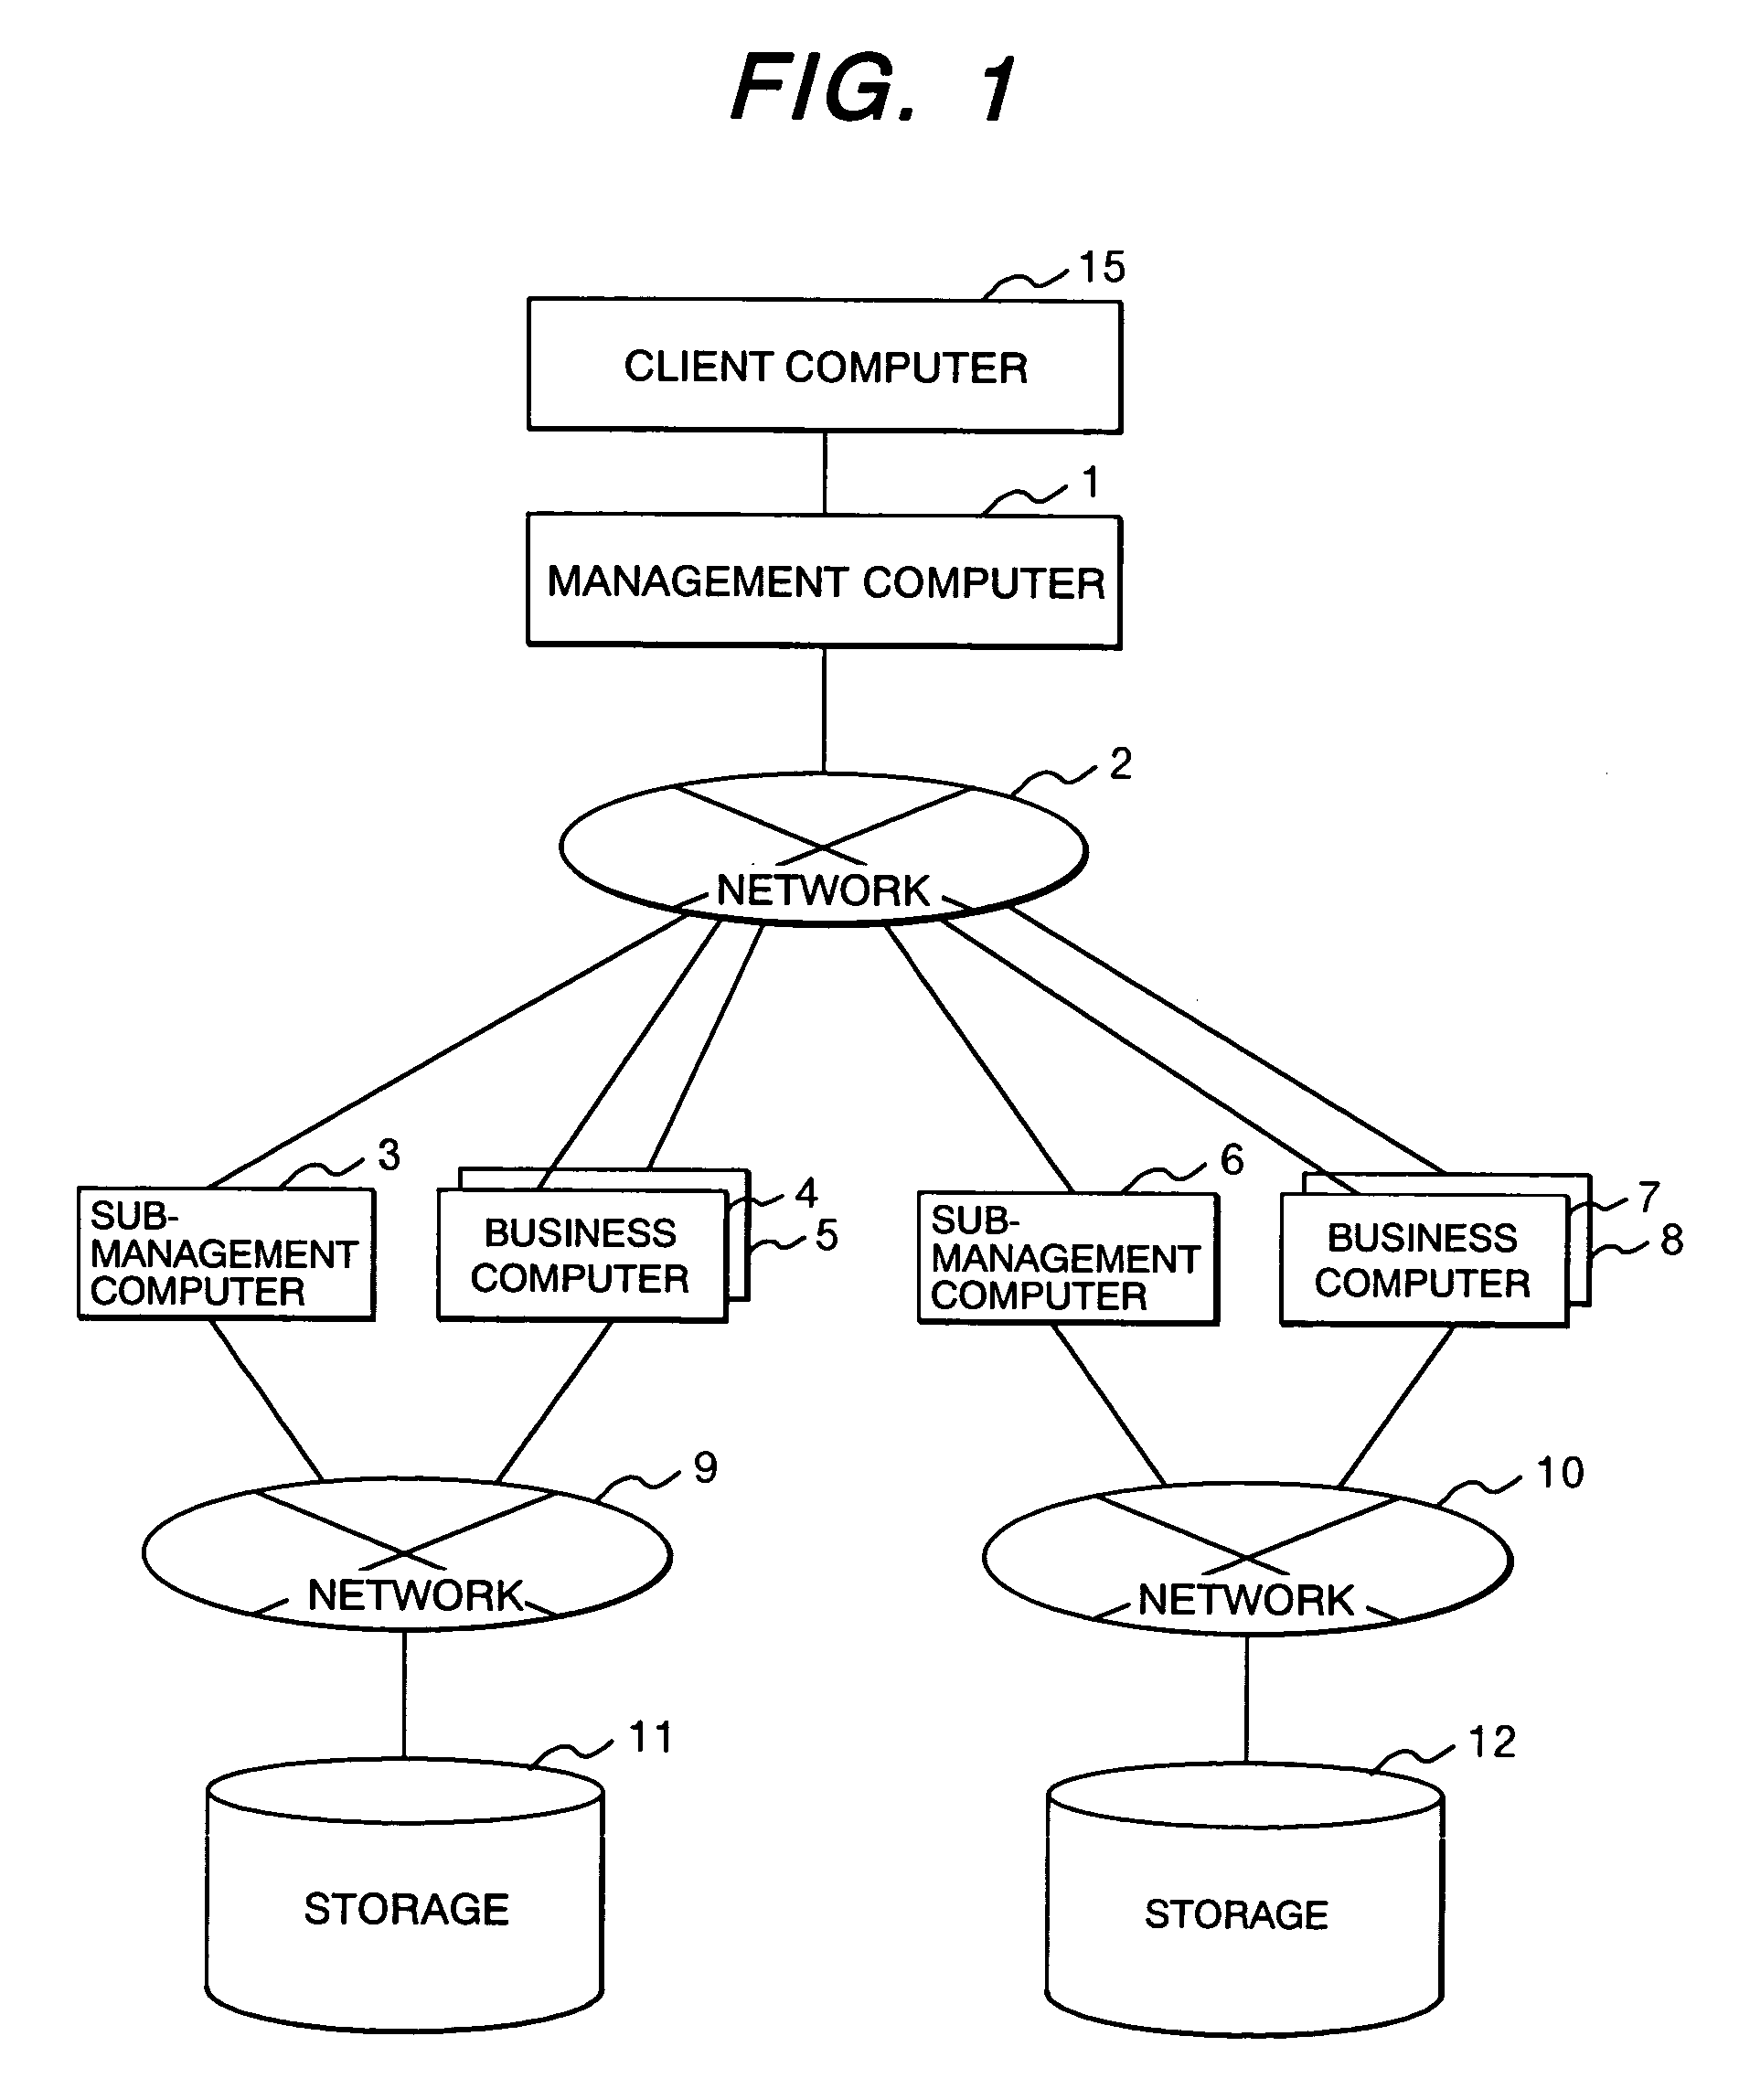 Redistribution of unused resources assigned to a first virtual computer having usage below a predetermined threshold to a second virtual computer